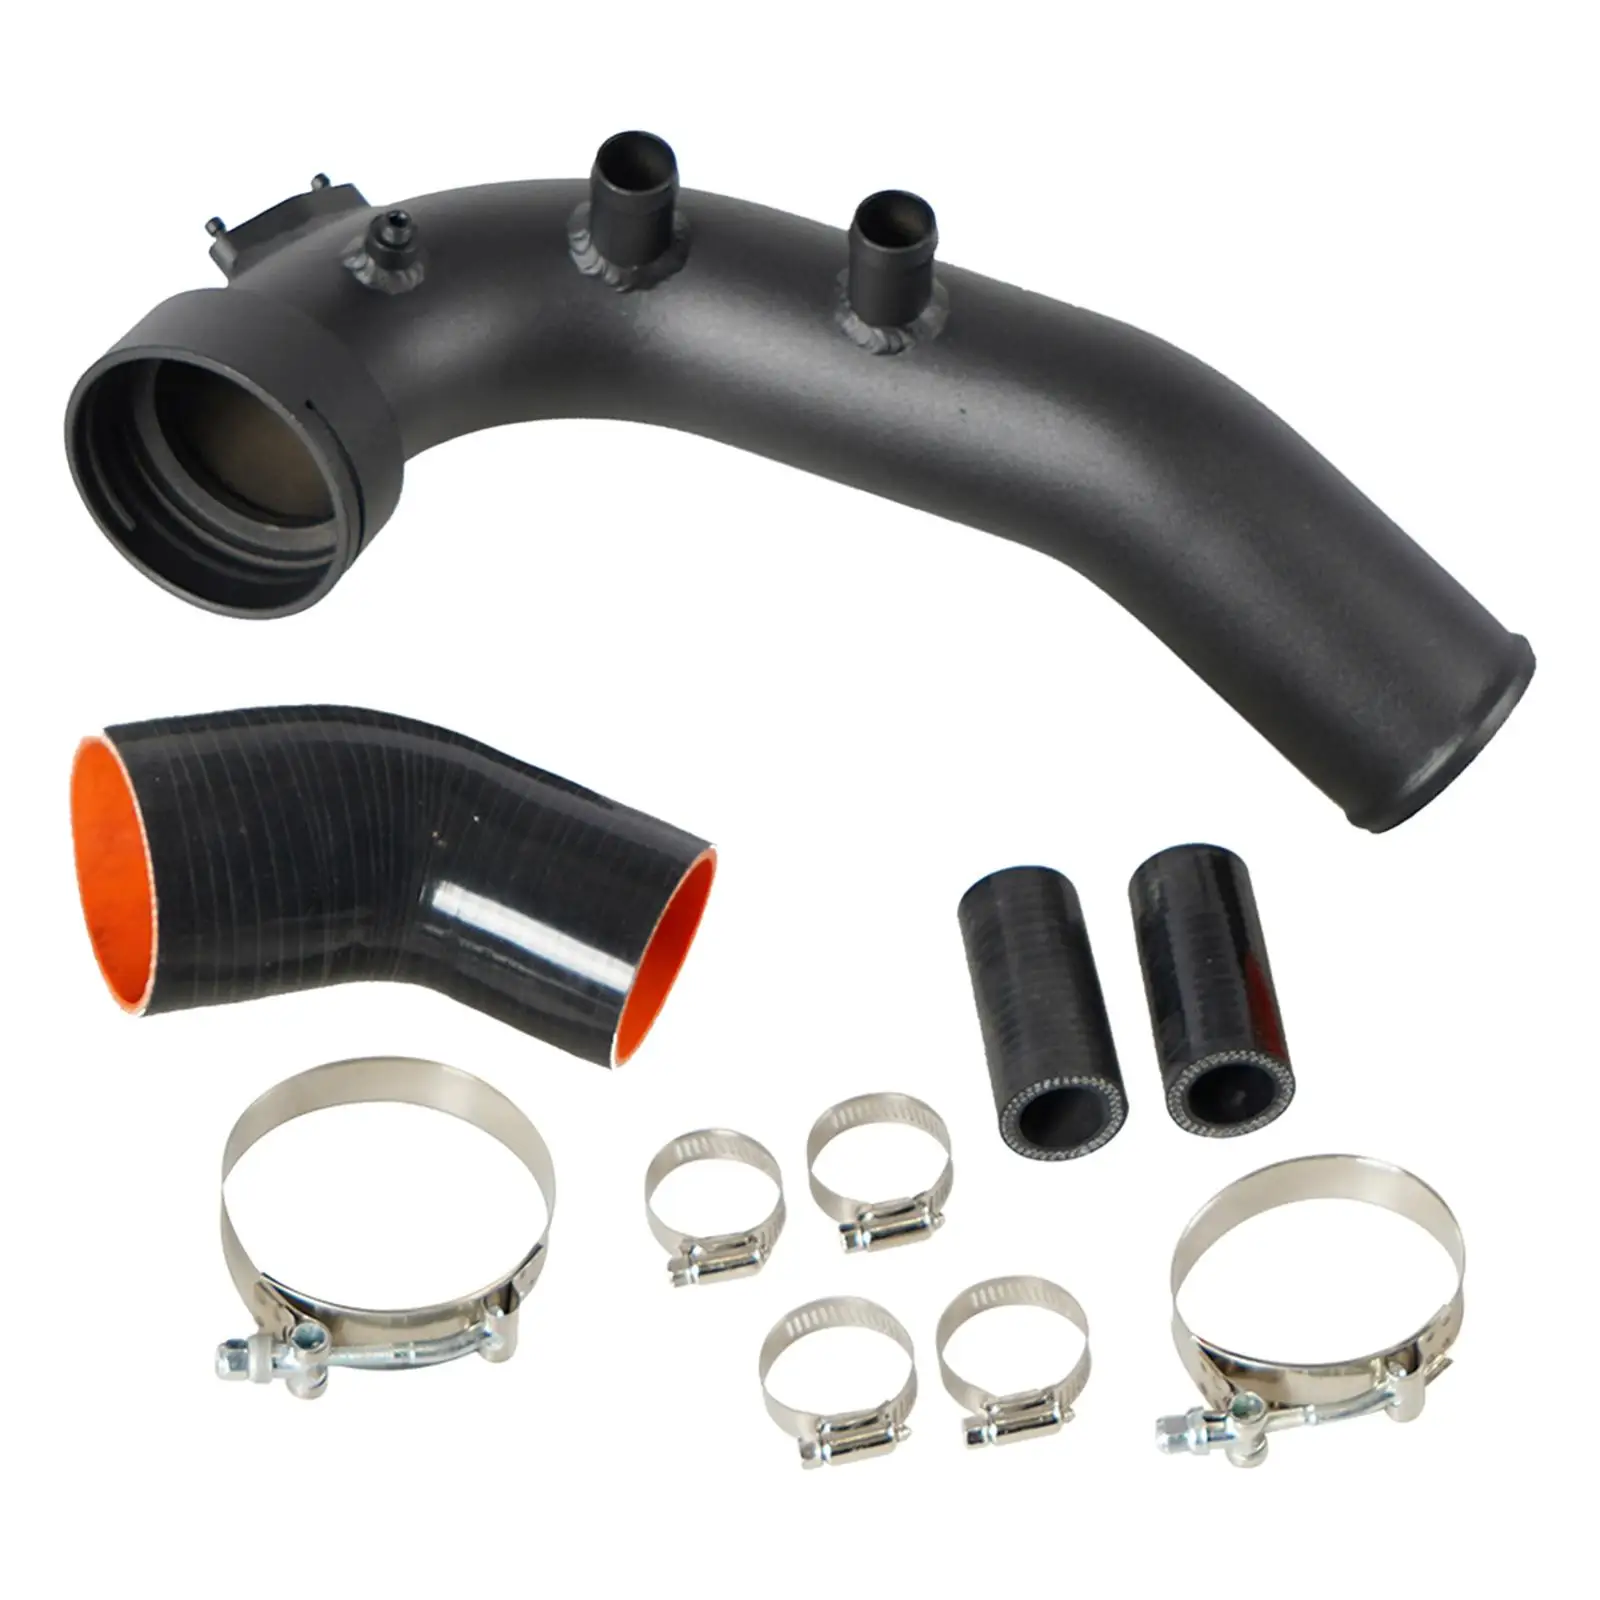 Air Intake Charge Pipe Kit Replacement Parts for BMW N54 E88 E90 E92 135i